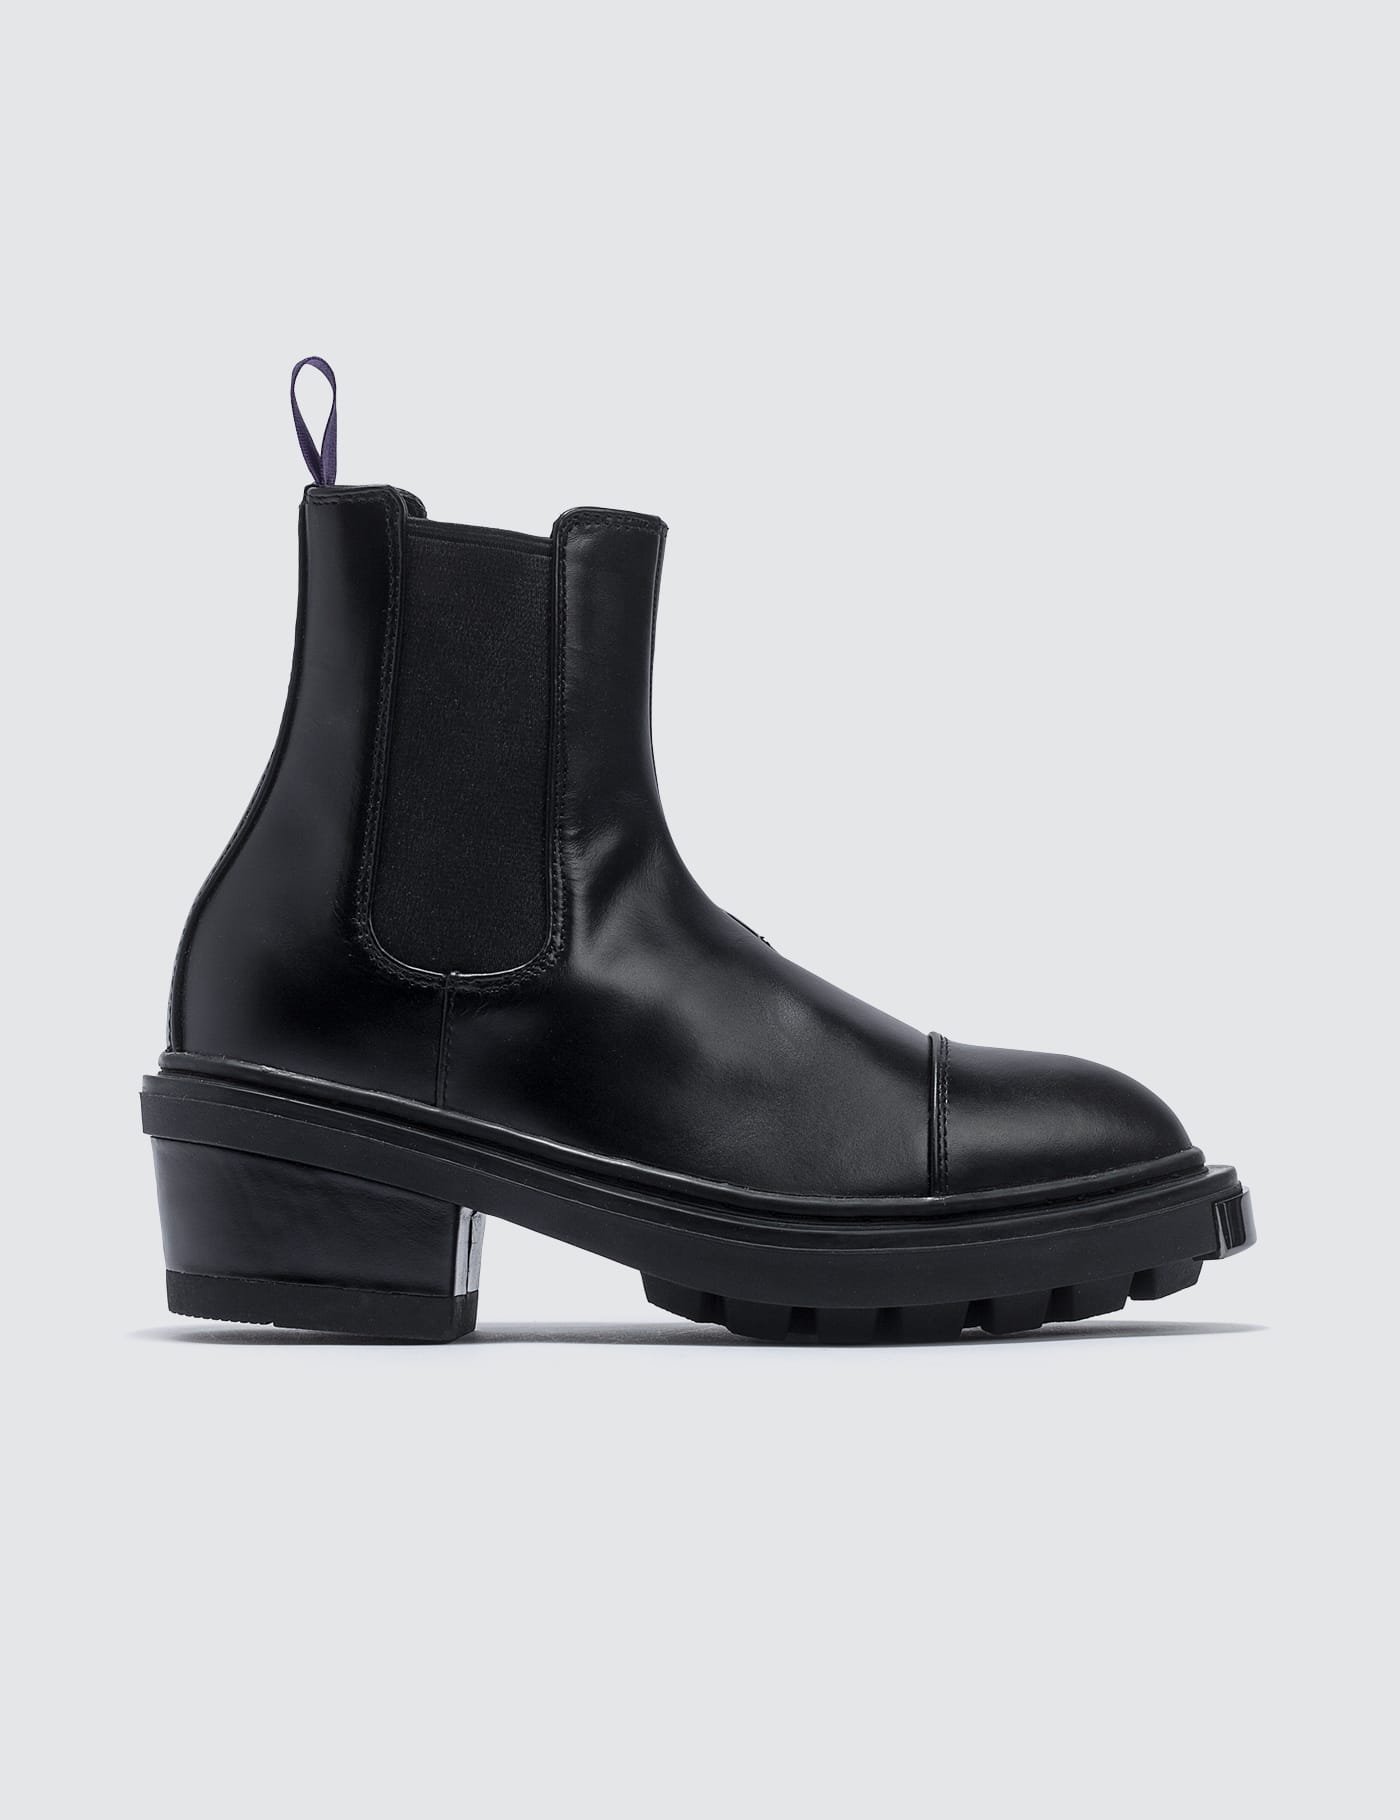 Eytys - Nikita Leather Boots | HBX - Globally Curated Fashion and 